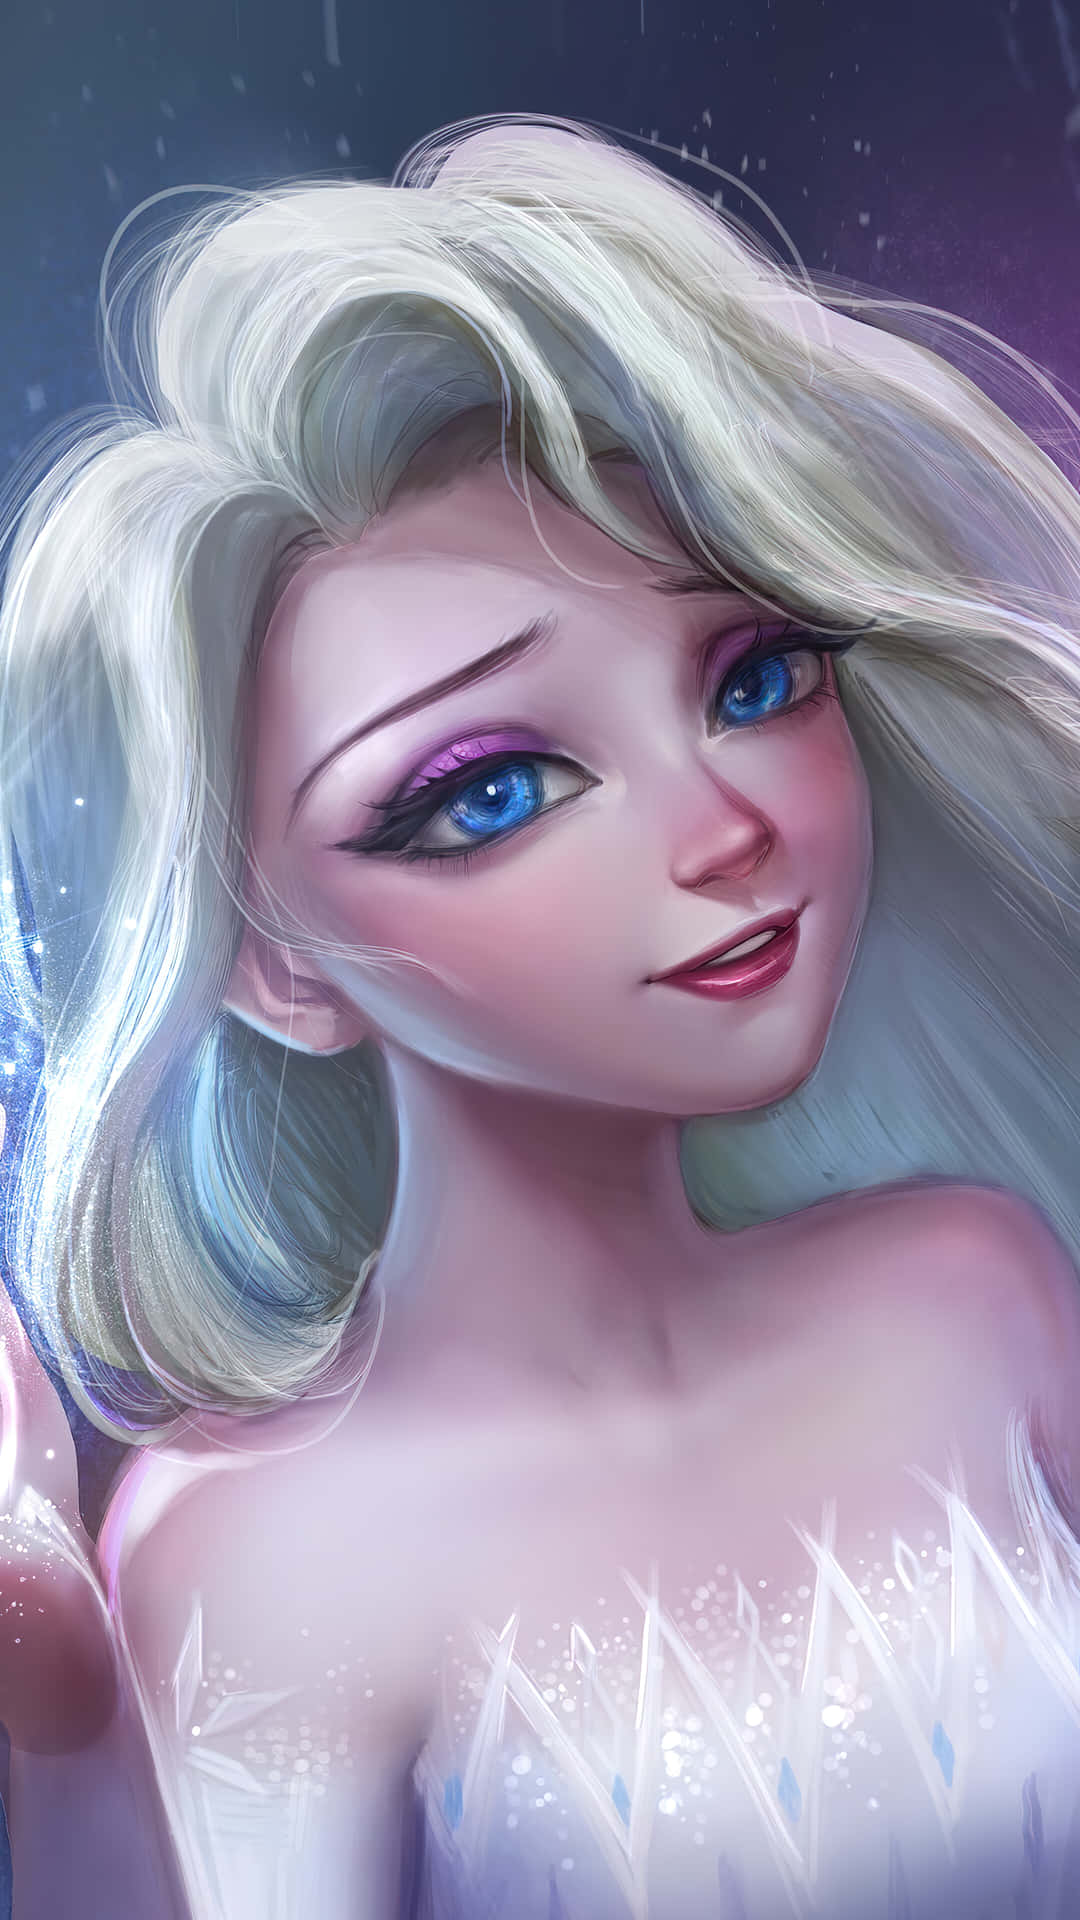 Through Her Journey, Elsa Has Transformed Into A Brave And Fearless Queen.